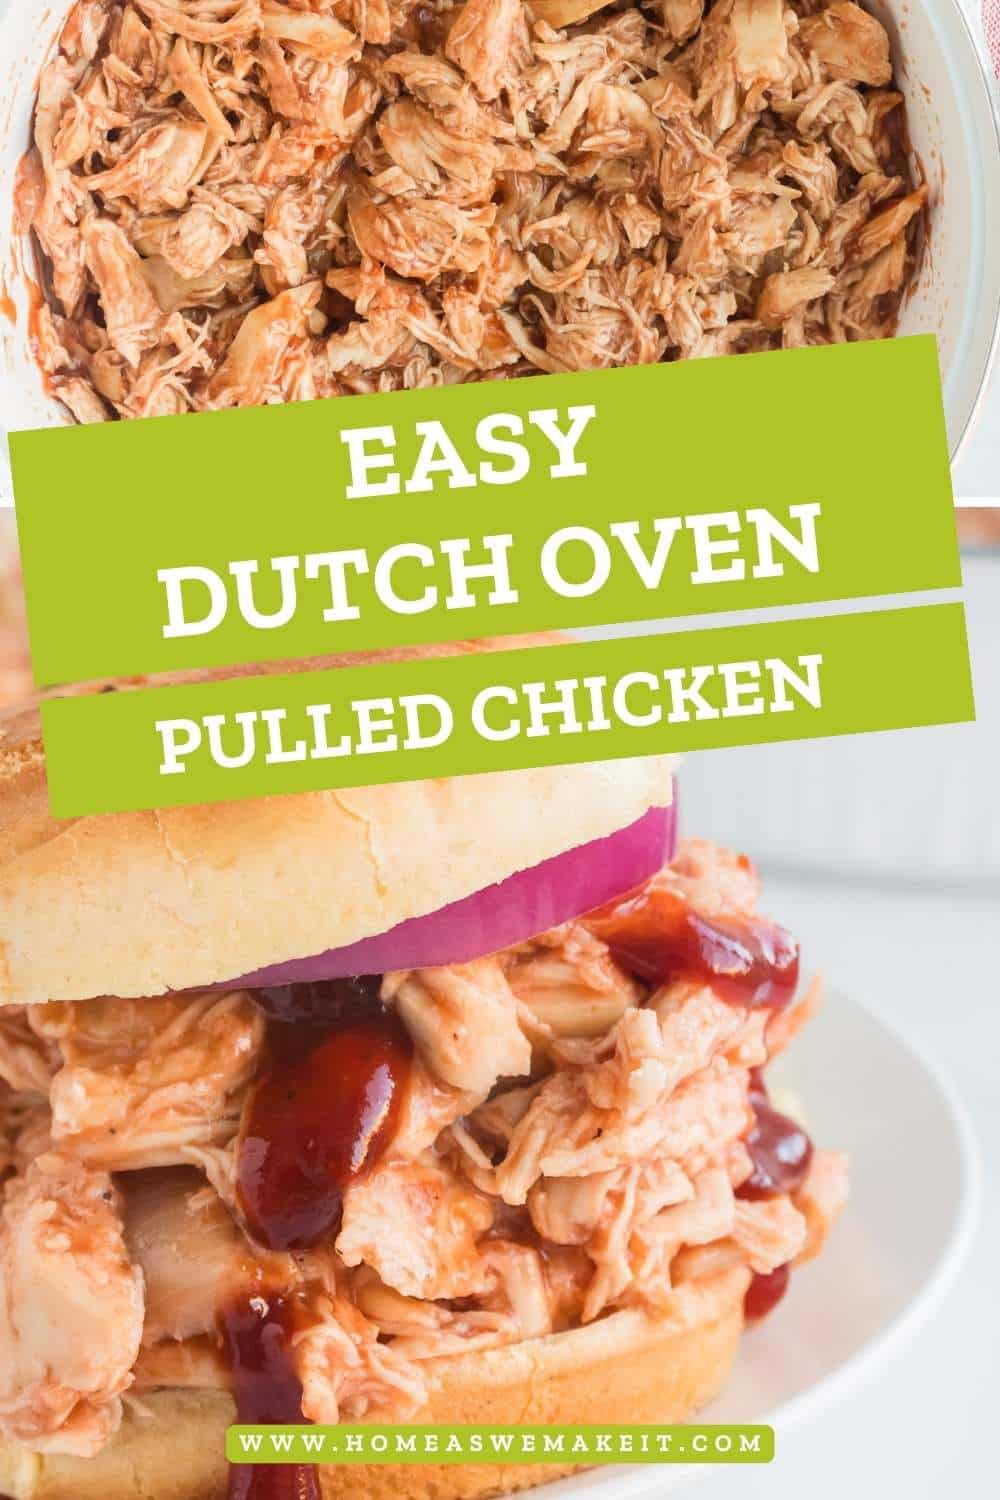 fast and easy Dutch oven pulled chicken